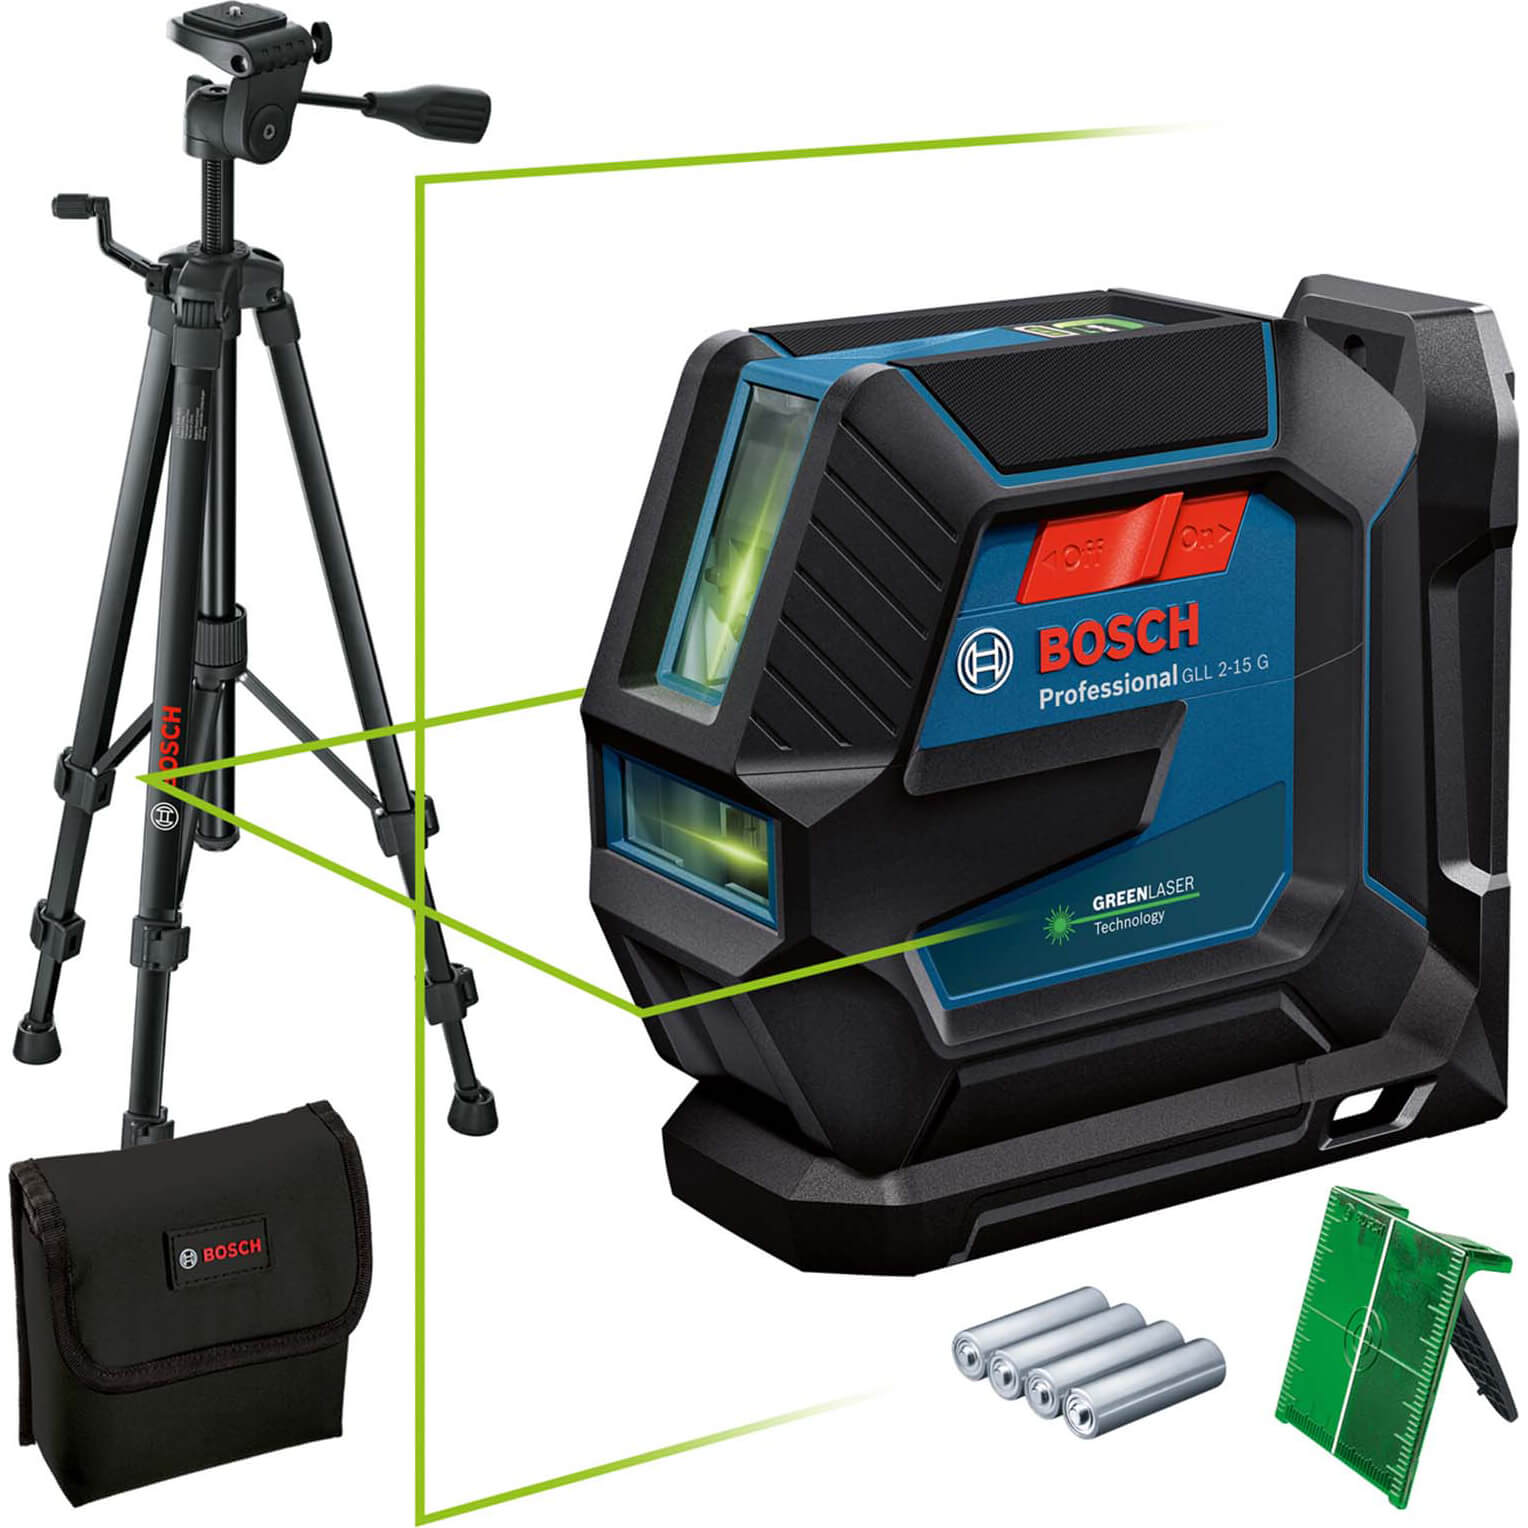 Image of Bosch GLL 2-15 G Green Beam Line Laser Level And Tripod Set